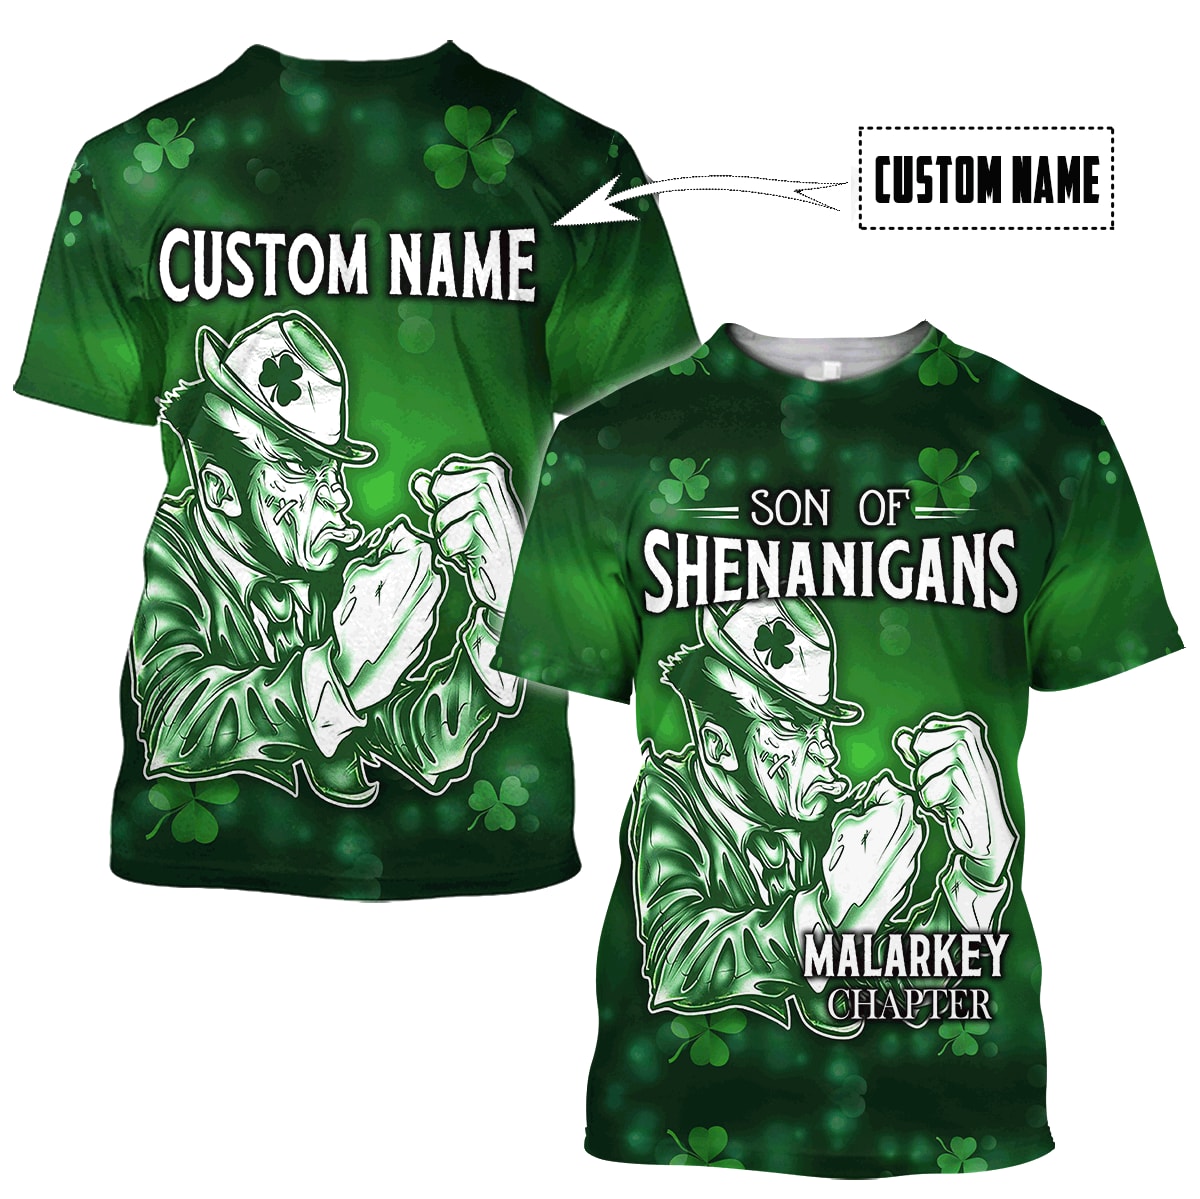 Personalized Irish St Patrick Day 3d Printed Shirts - St Patricks Day 3D Shirts for Men & Women